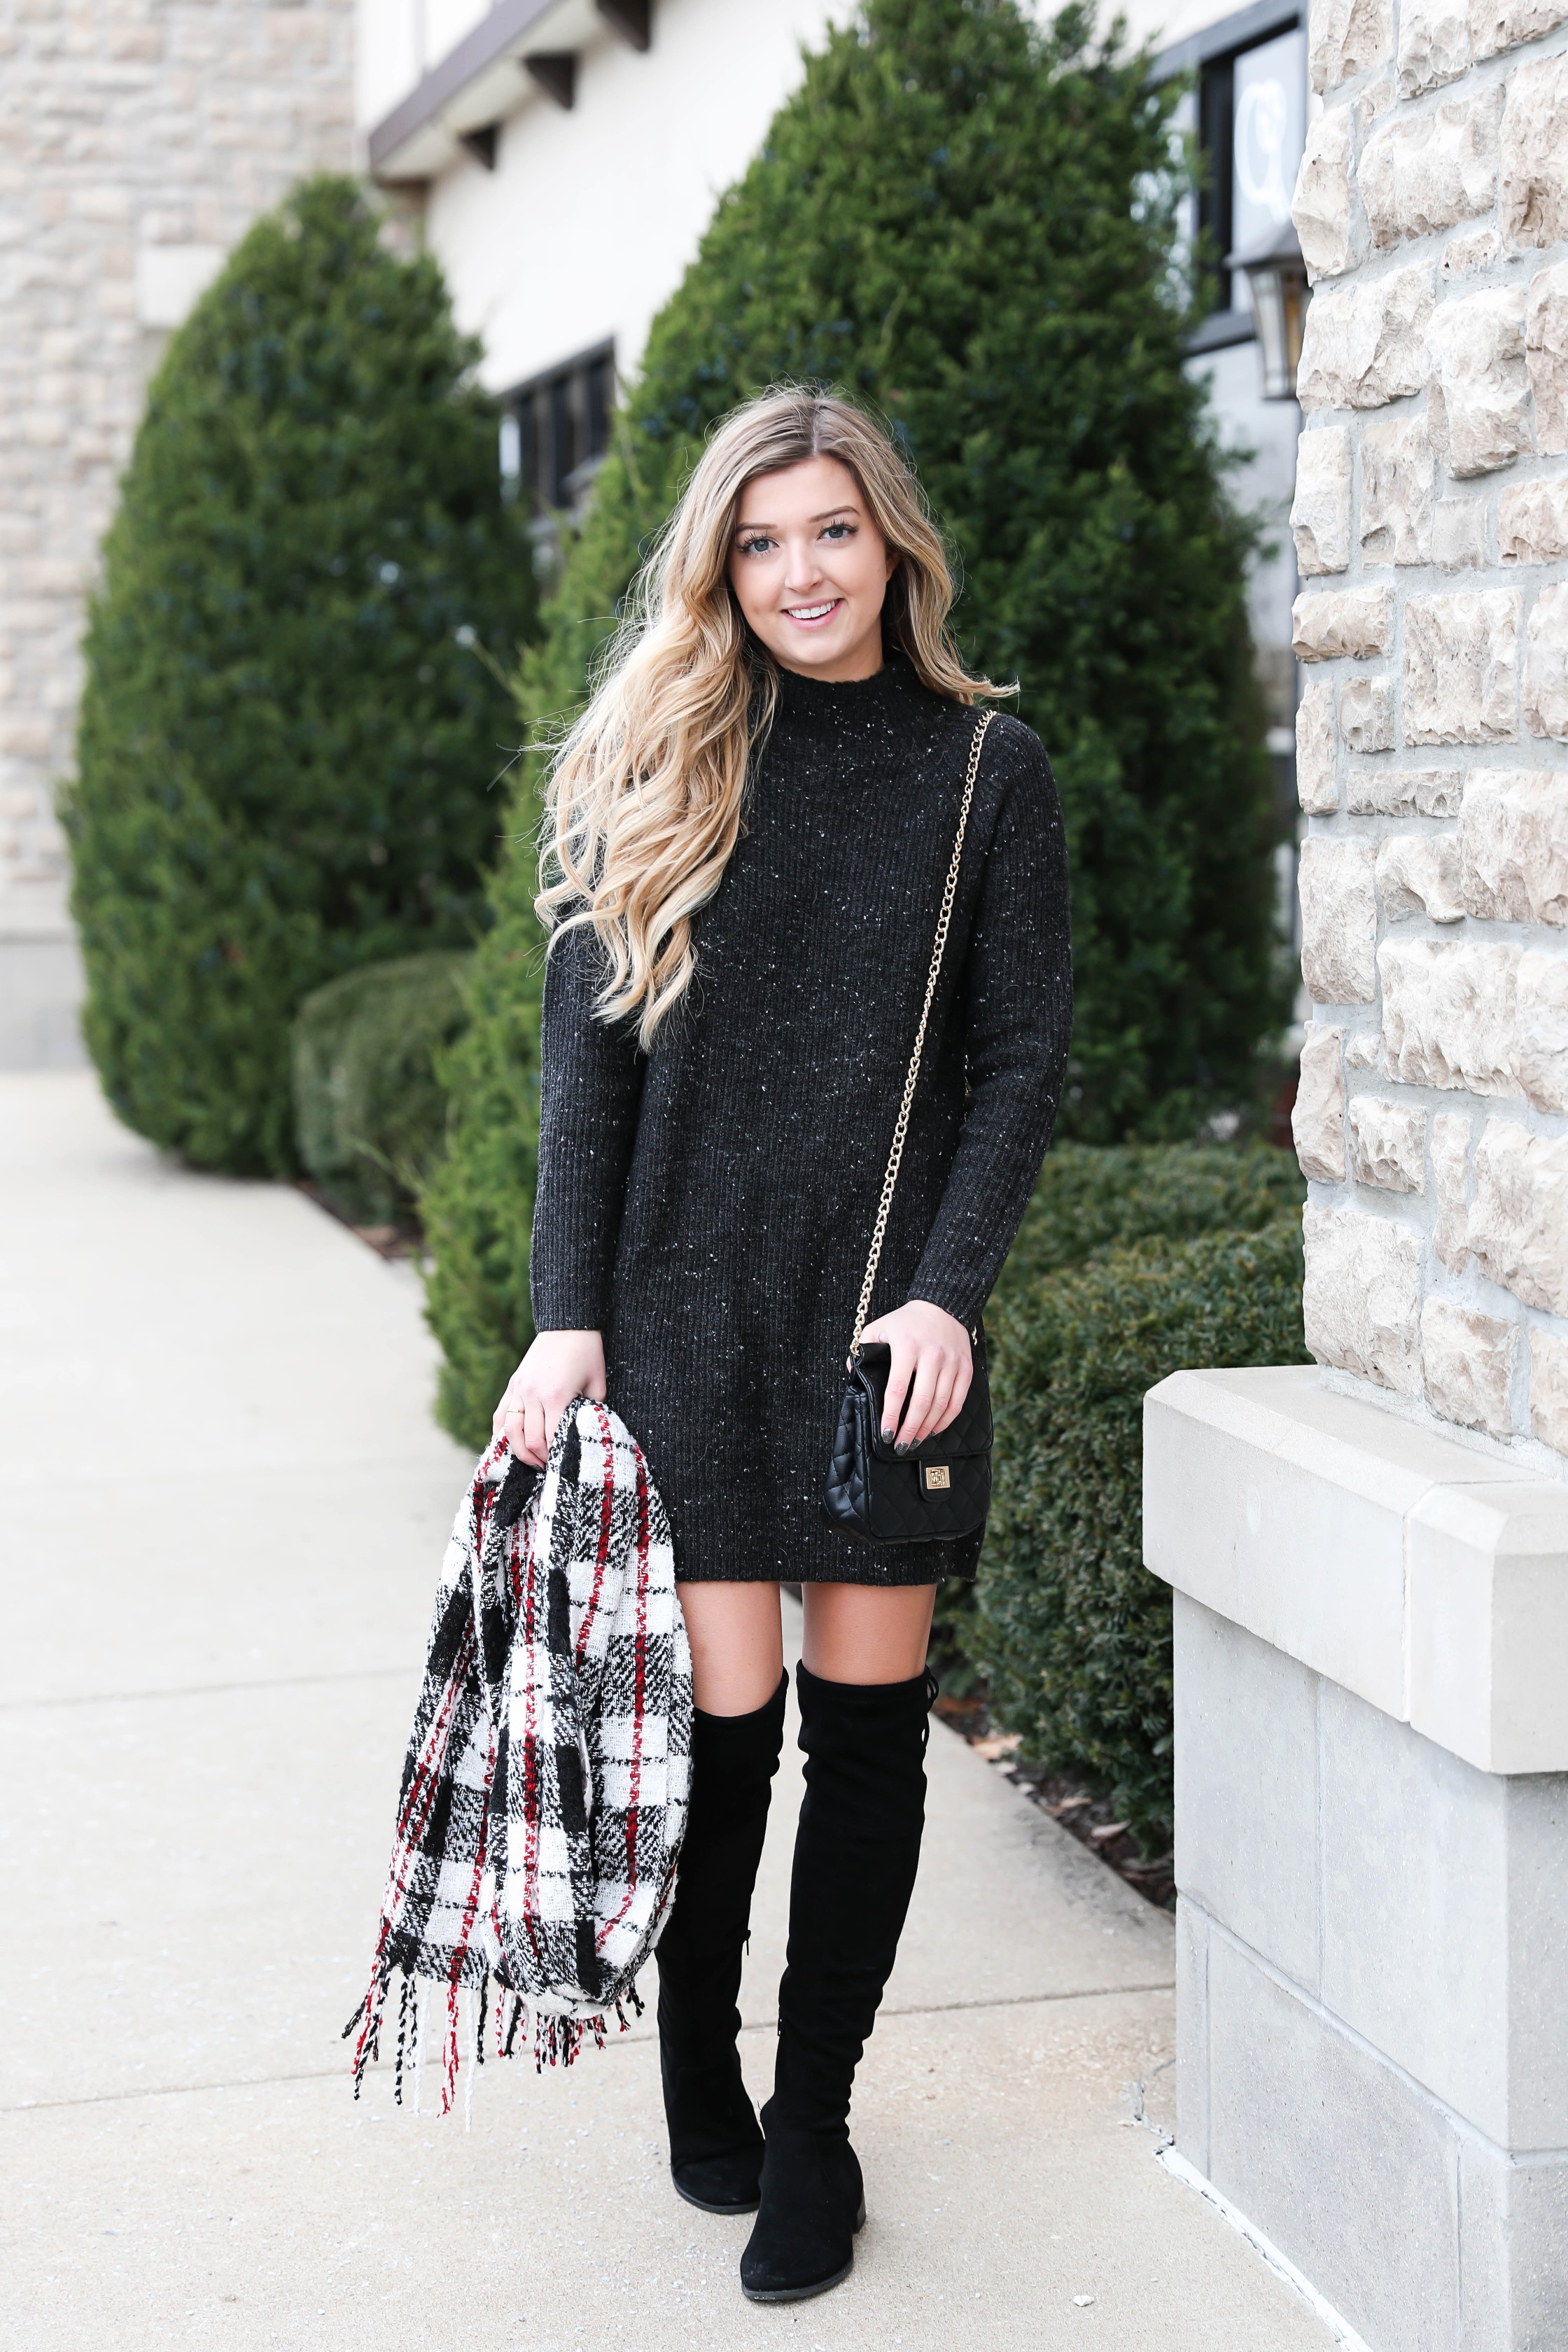 Black sweater dress paired with the cutest red plaid scarf and my favorite black over the knee boots! Cutest curly hair and winter outfit! Details on fashion blog daily dose of charm by lauren lindmark